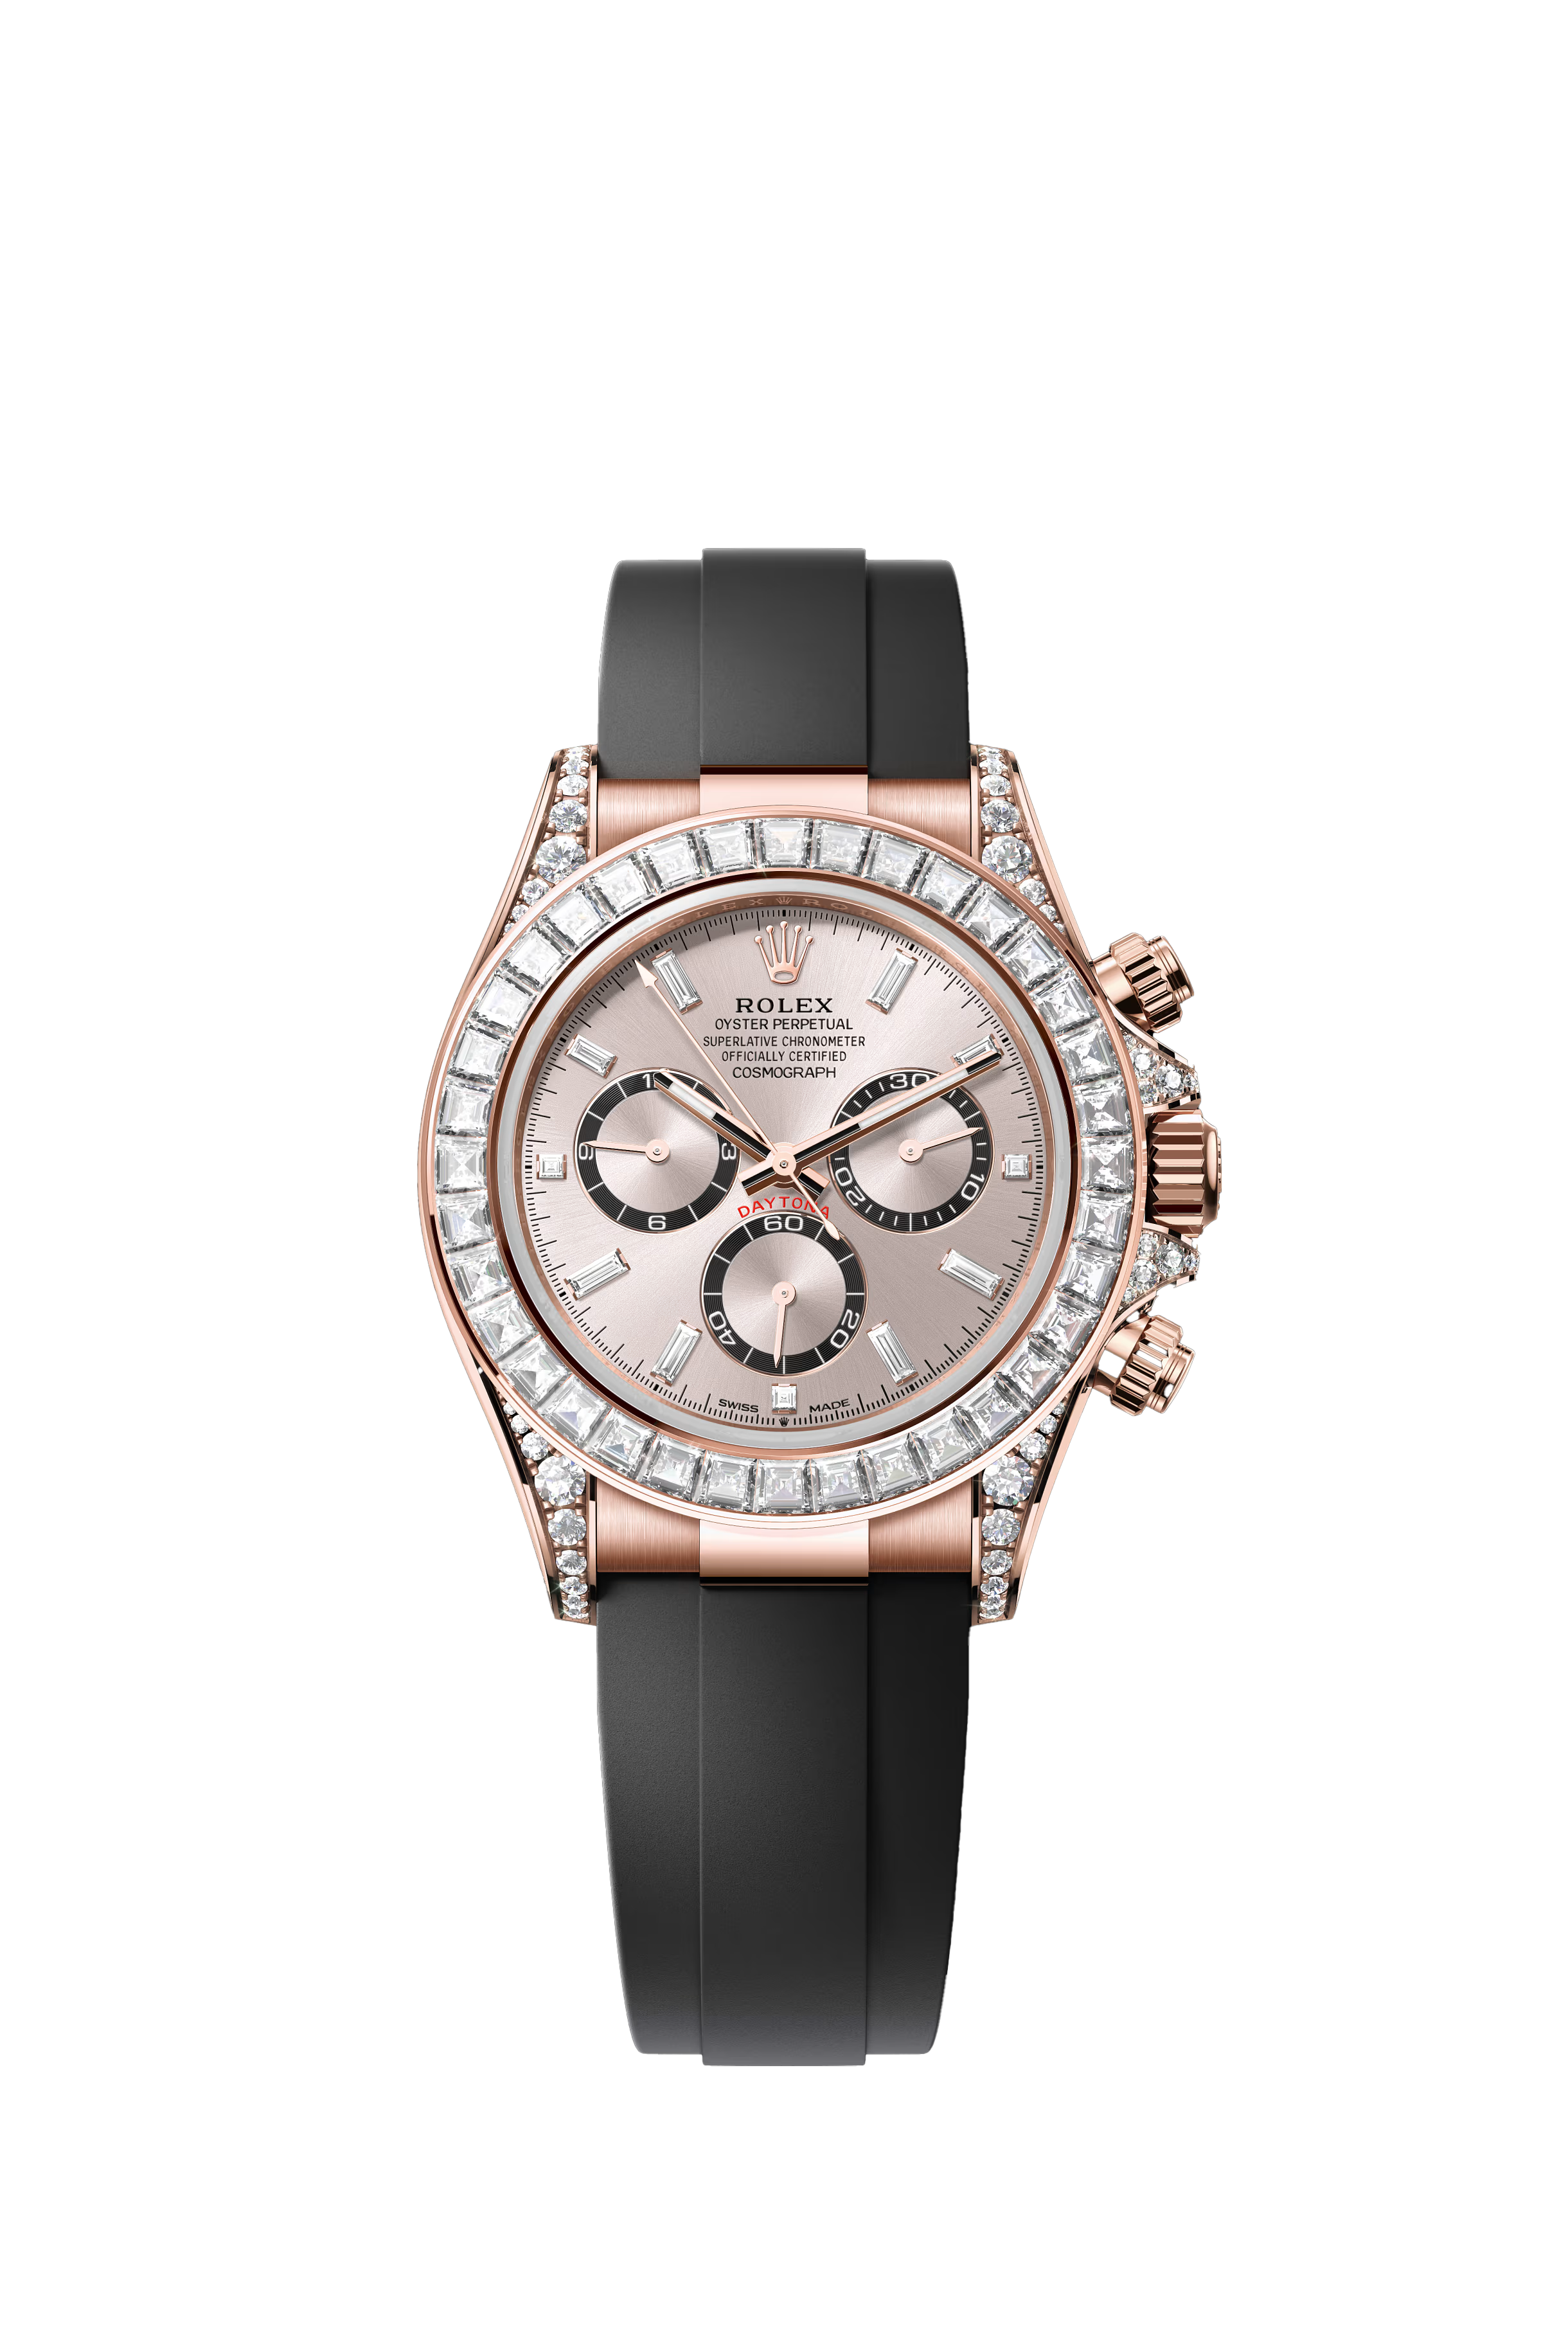 Rolex Cosmograph Daytona Oyster, 40 mm, Everose gold and diamonds Reference 126535TBR